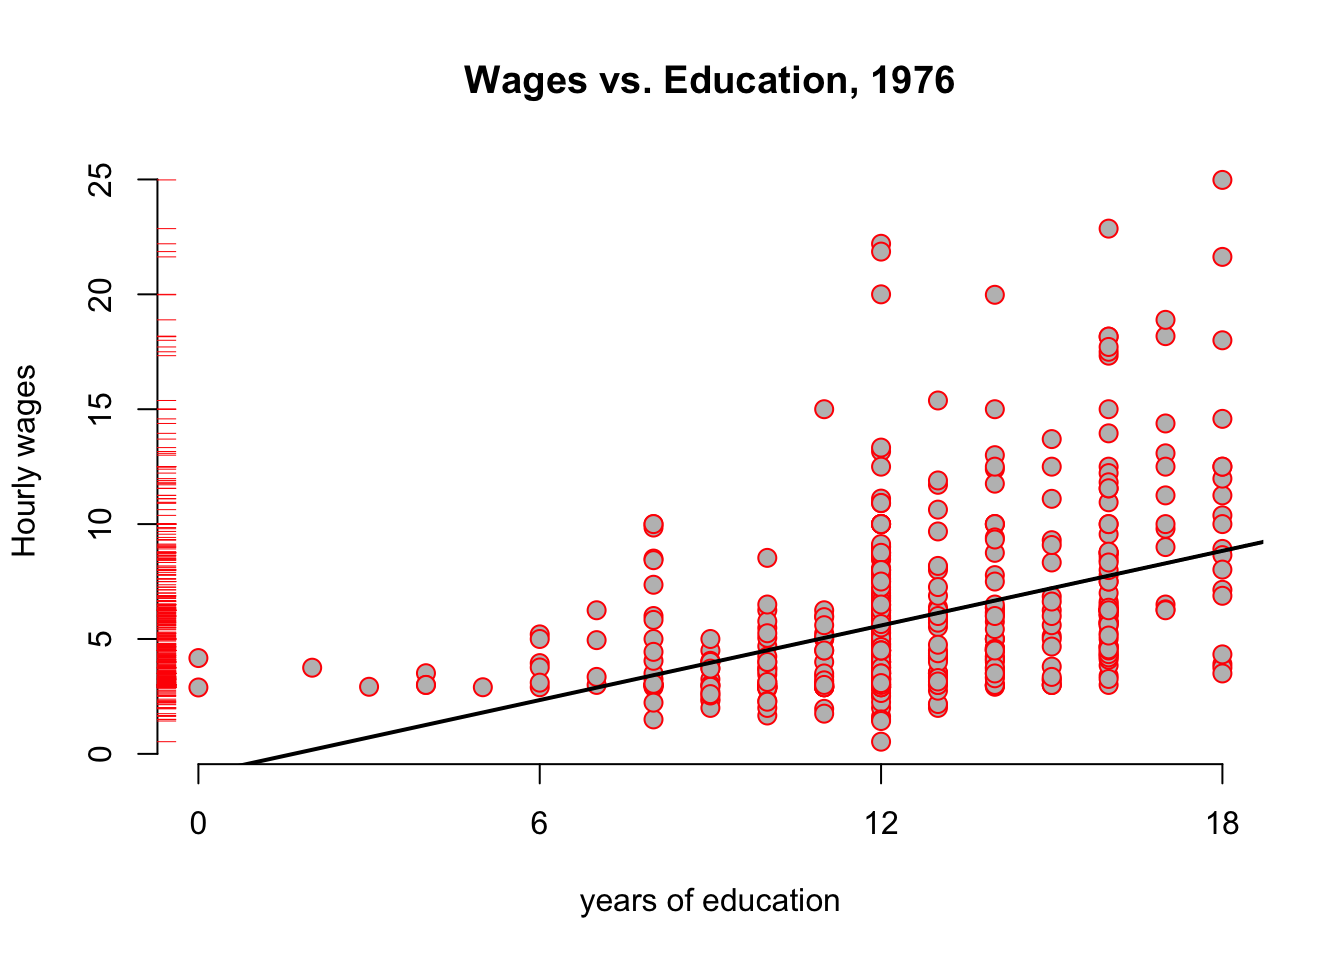 Wages vs Education from the wooldridge dataset wage1, with regression